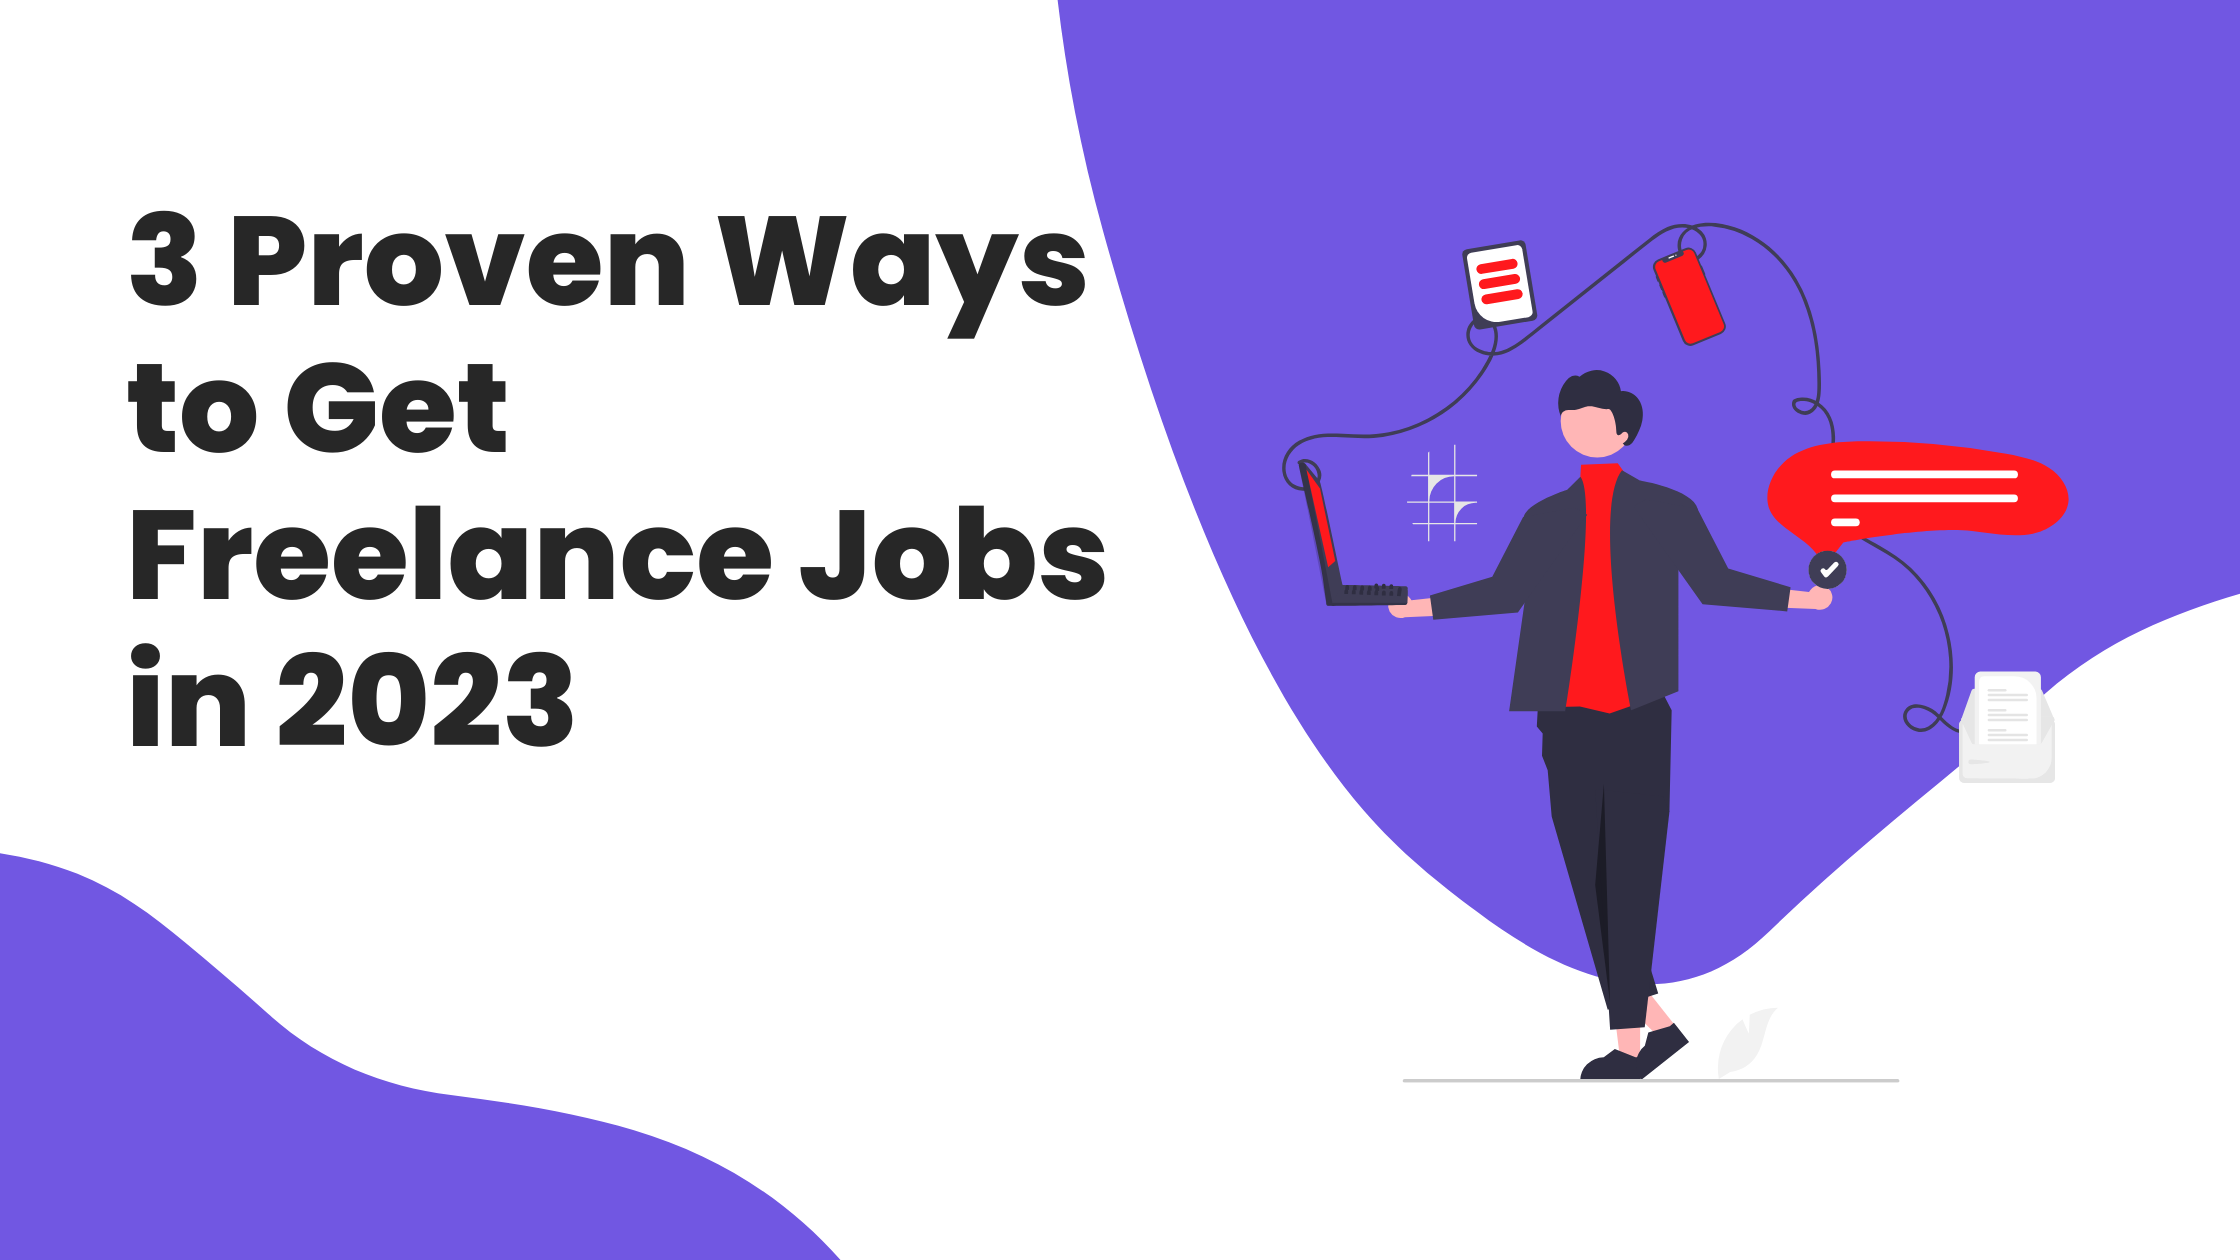 3 Proven Ways to Get Freelance Jobs in 2023